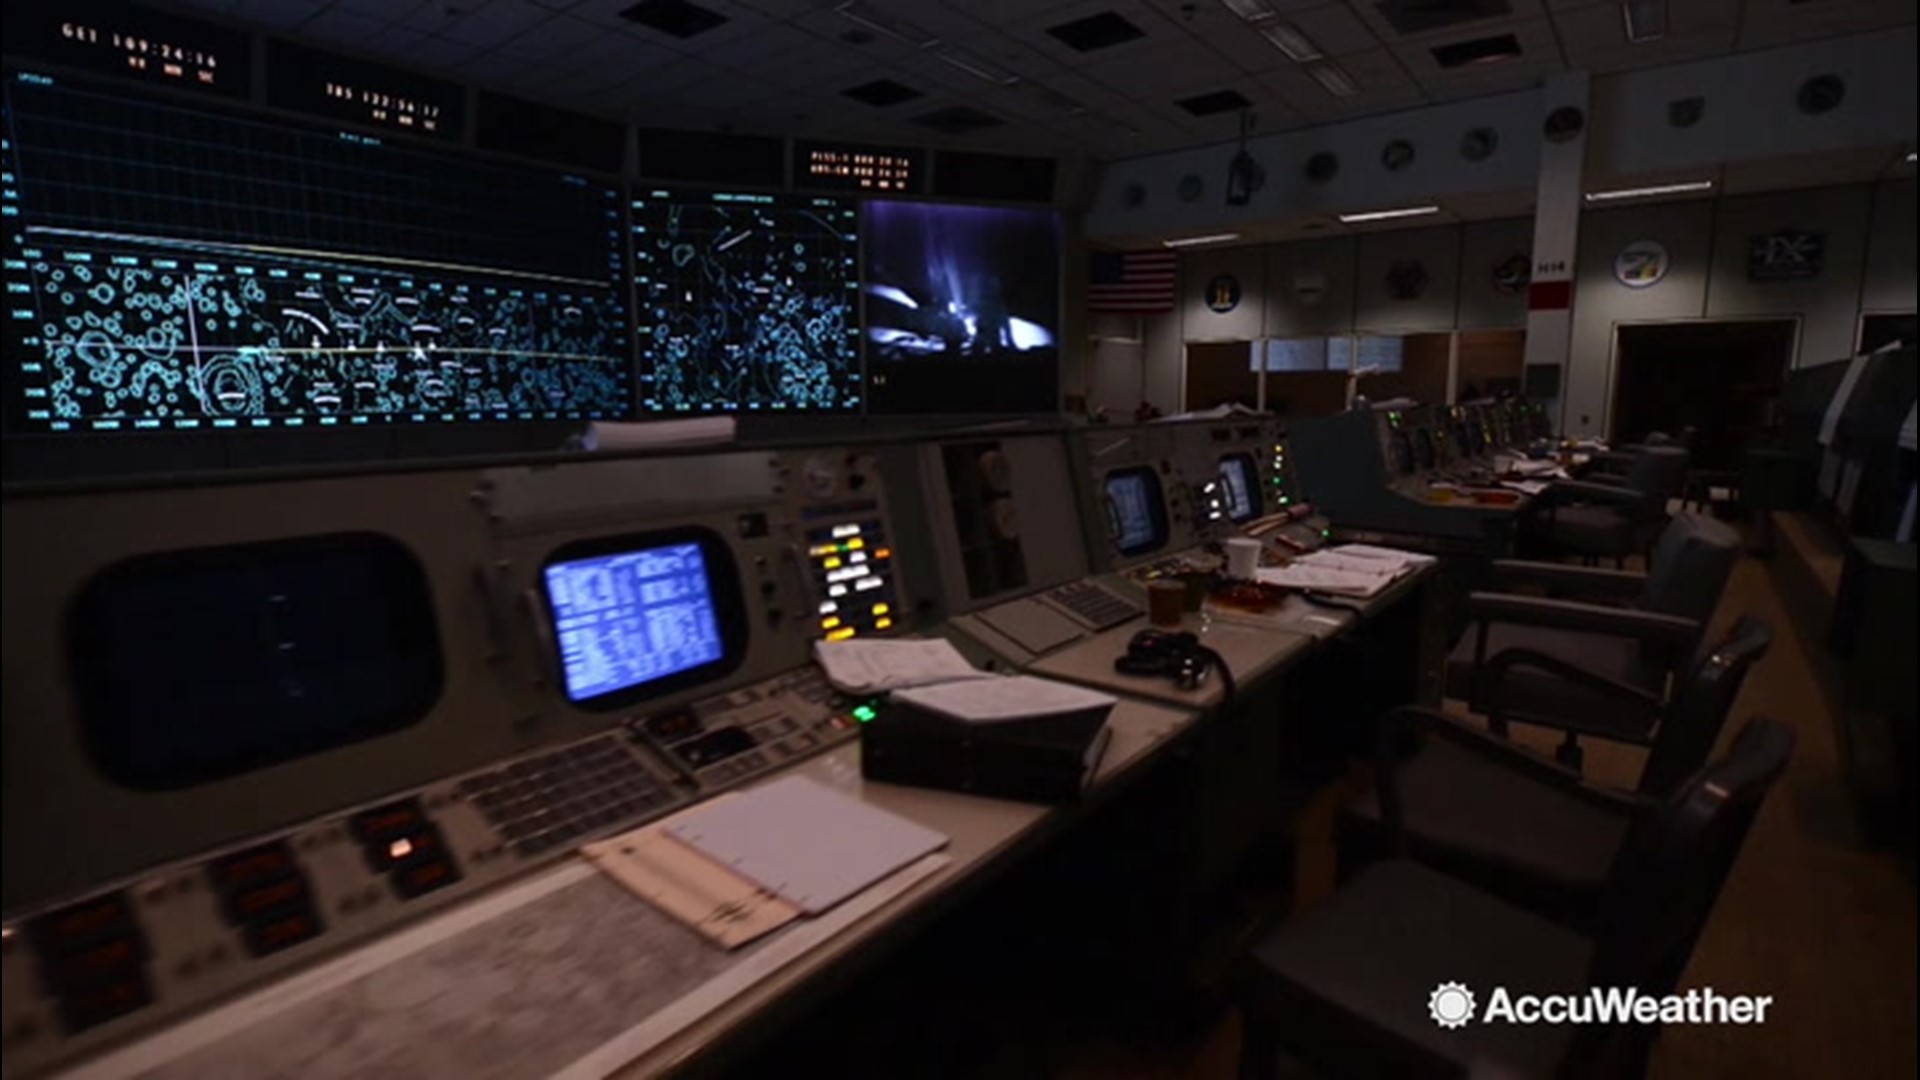 After years of storage, the Apollo Mission Control Center was renovated to its former glory just in time for the 50th anniversary of the moon landing.